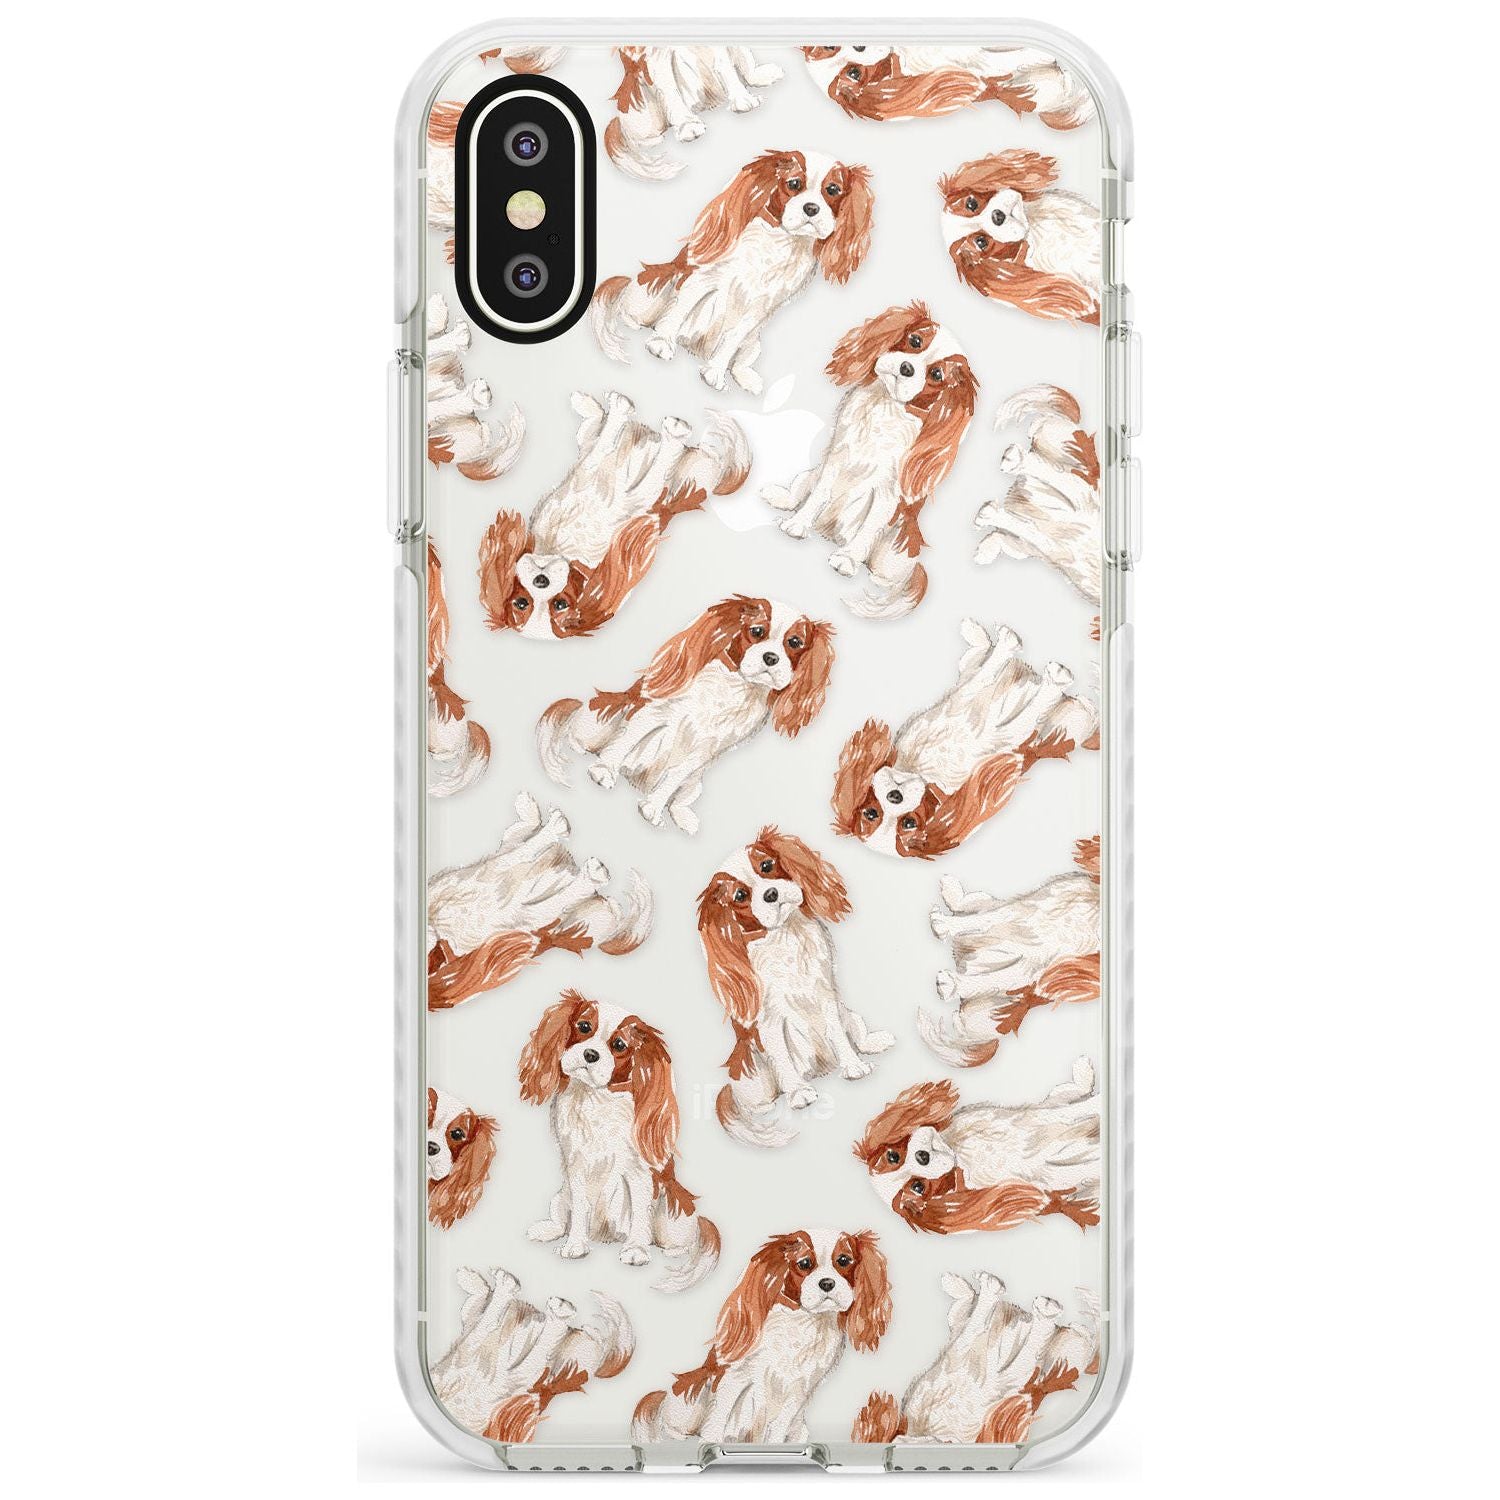 Cavalier King Charles Spaniel Dog Pattern Impact Phone Case for iPhone X XS Max XR